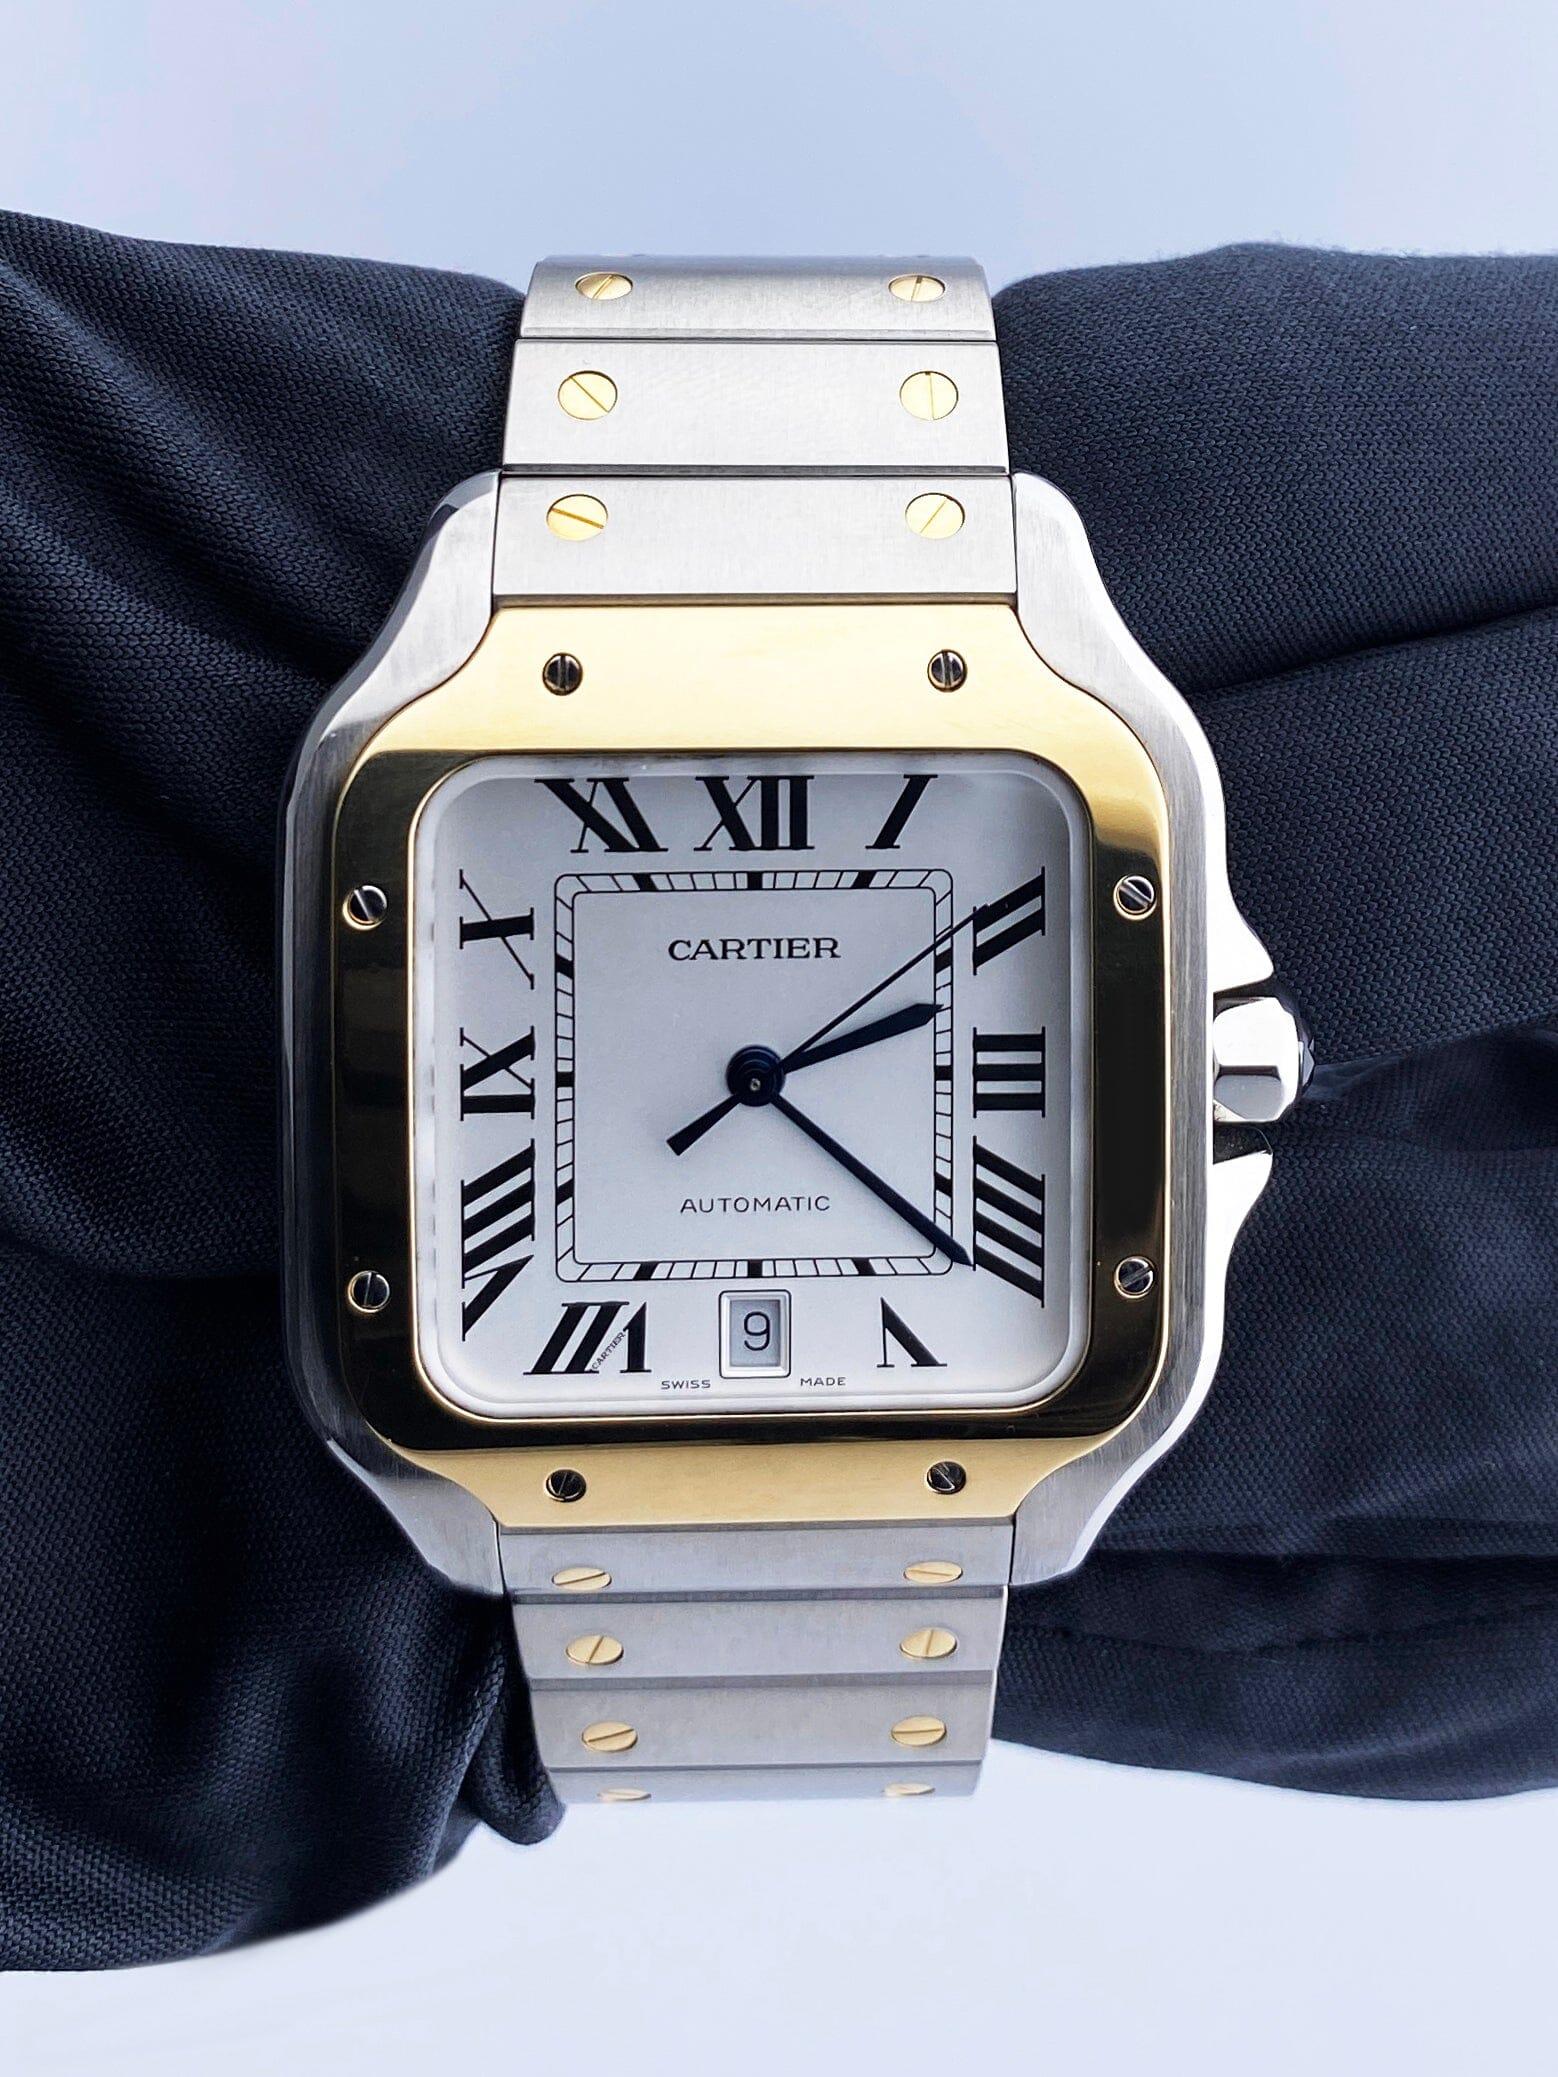 Cartier Santos W2SA0006 / 4072 Mens Watch. 40mm stainless steel case. 18K yellow gold bezel. Sliver dial with blue steel hands Black Roman numeral hour markers. Minute markers around an inner dial. Date display at 6 o'clock position. 18K yellow gold